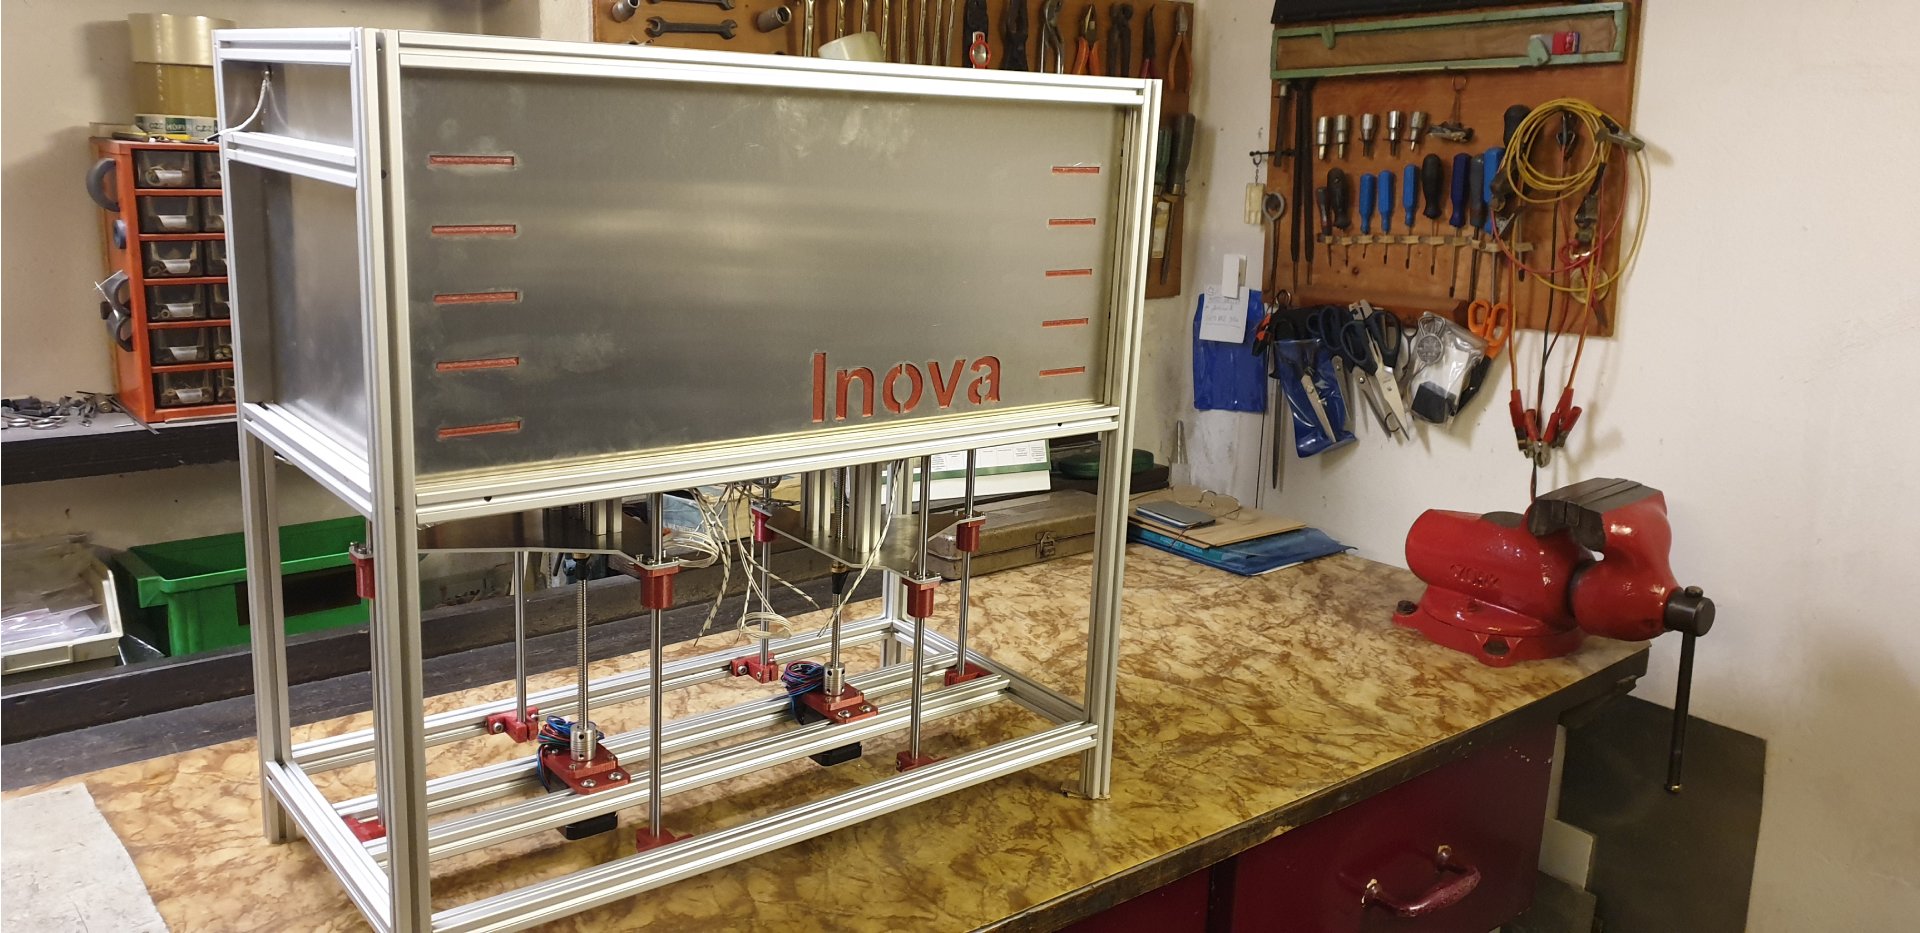 Printer Frame Build In A Few Simple Steps